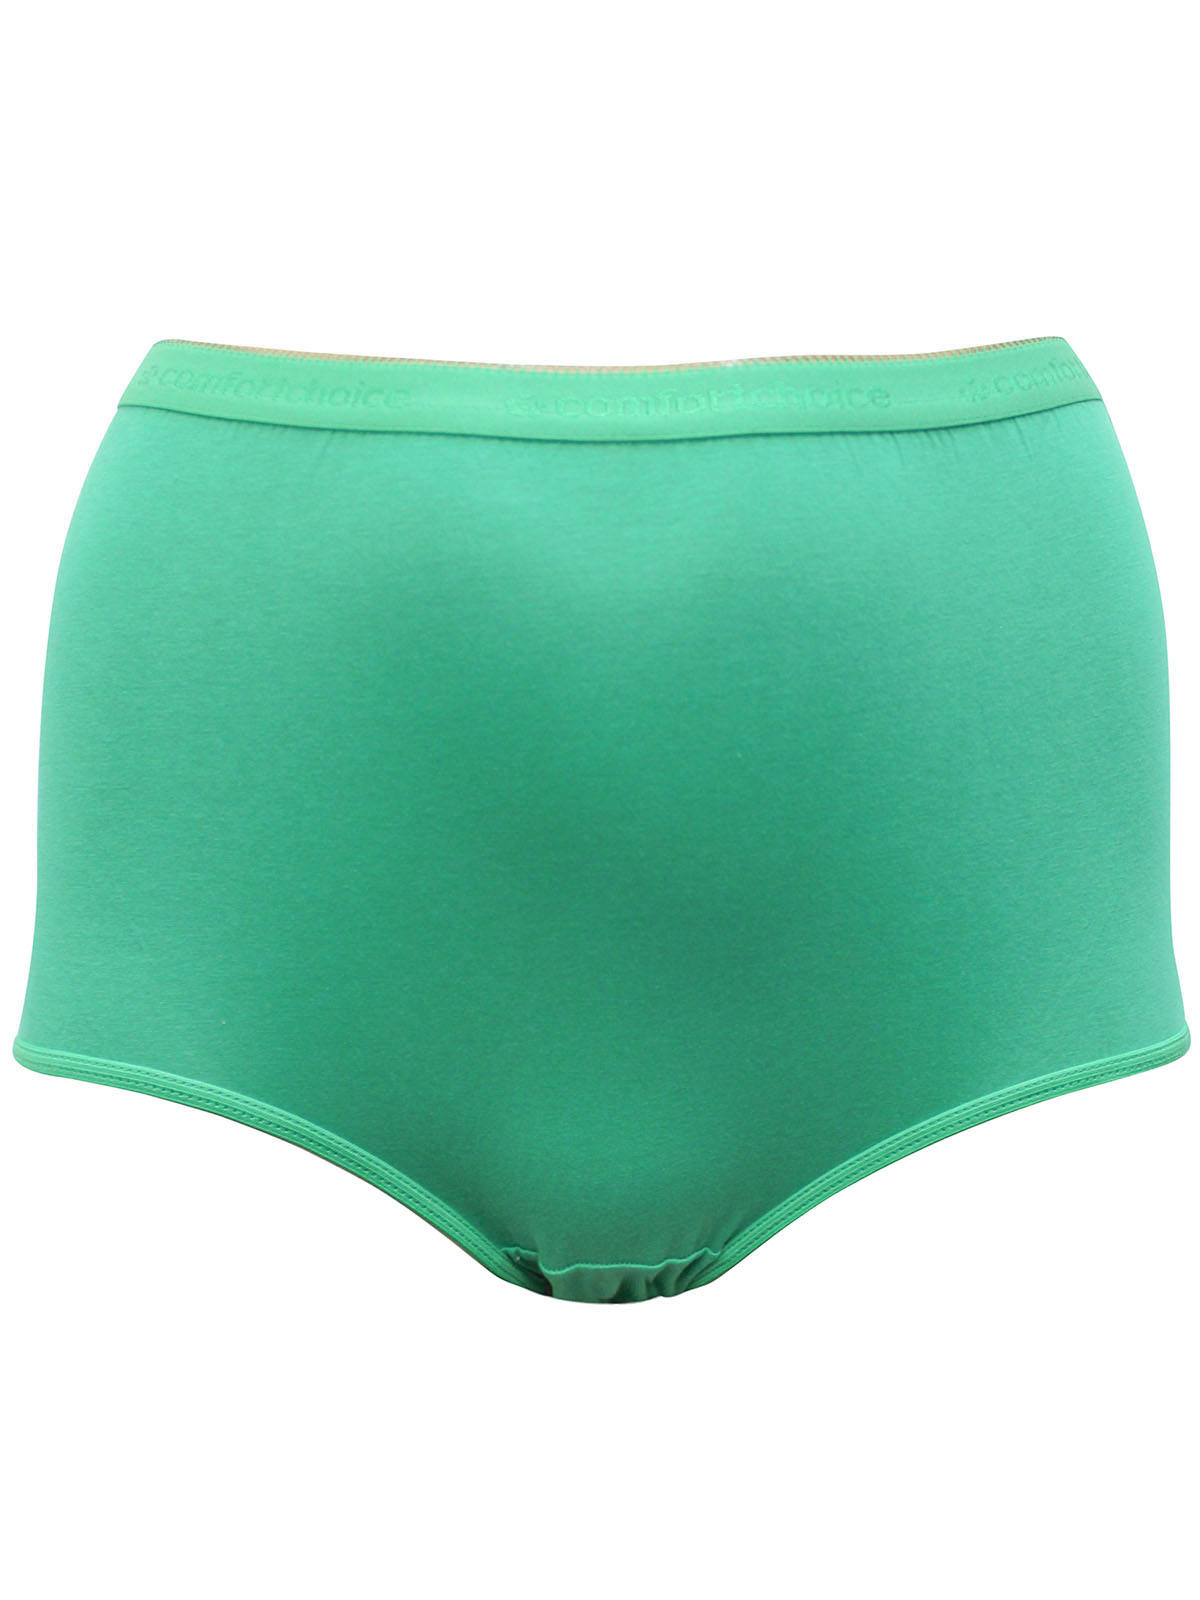 Comfort Choice - - Comfort Choice GREEN Pure Cotton High Waisted Full Briefs  - Plus Size 12 to 42/4